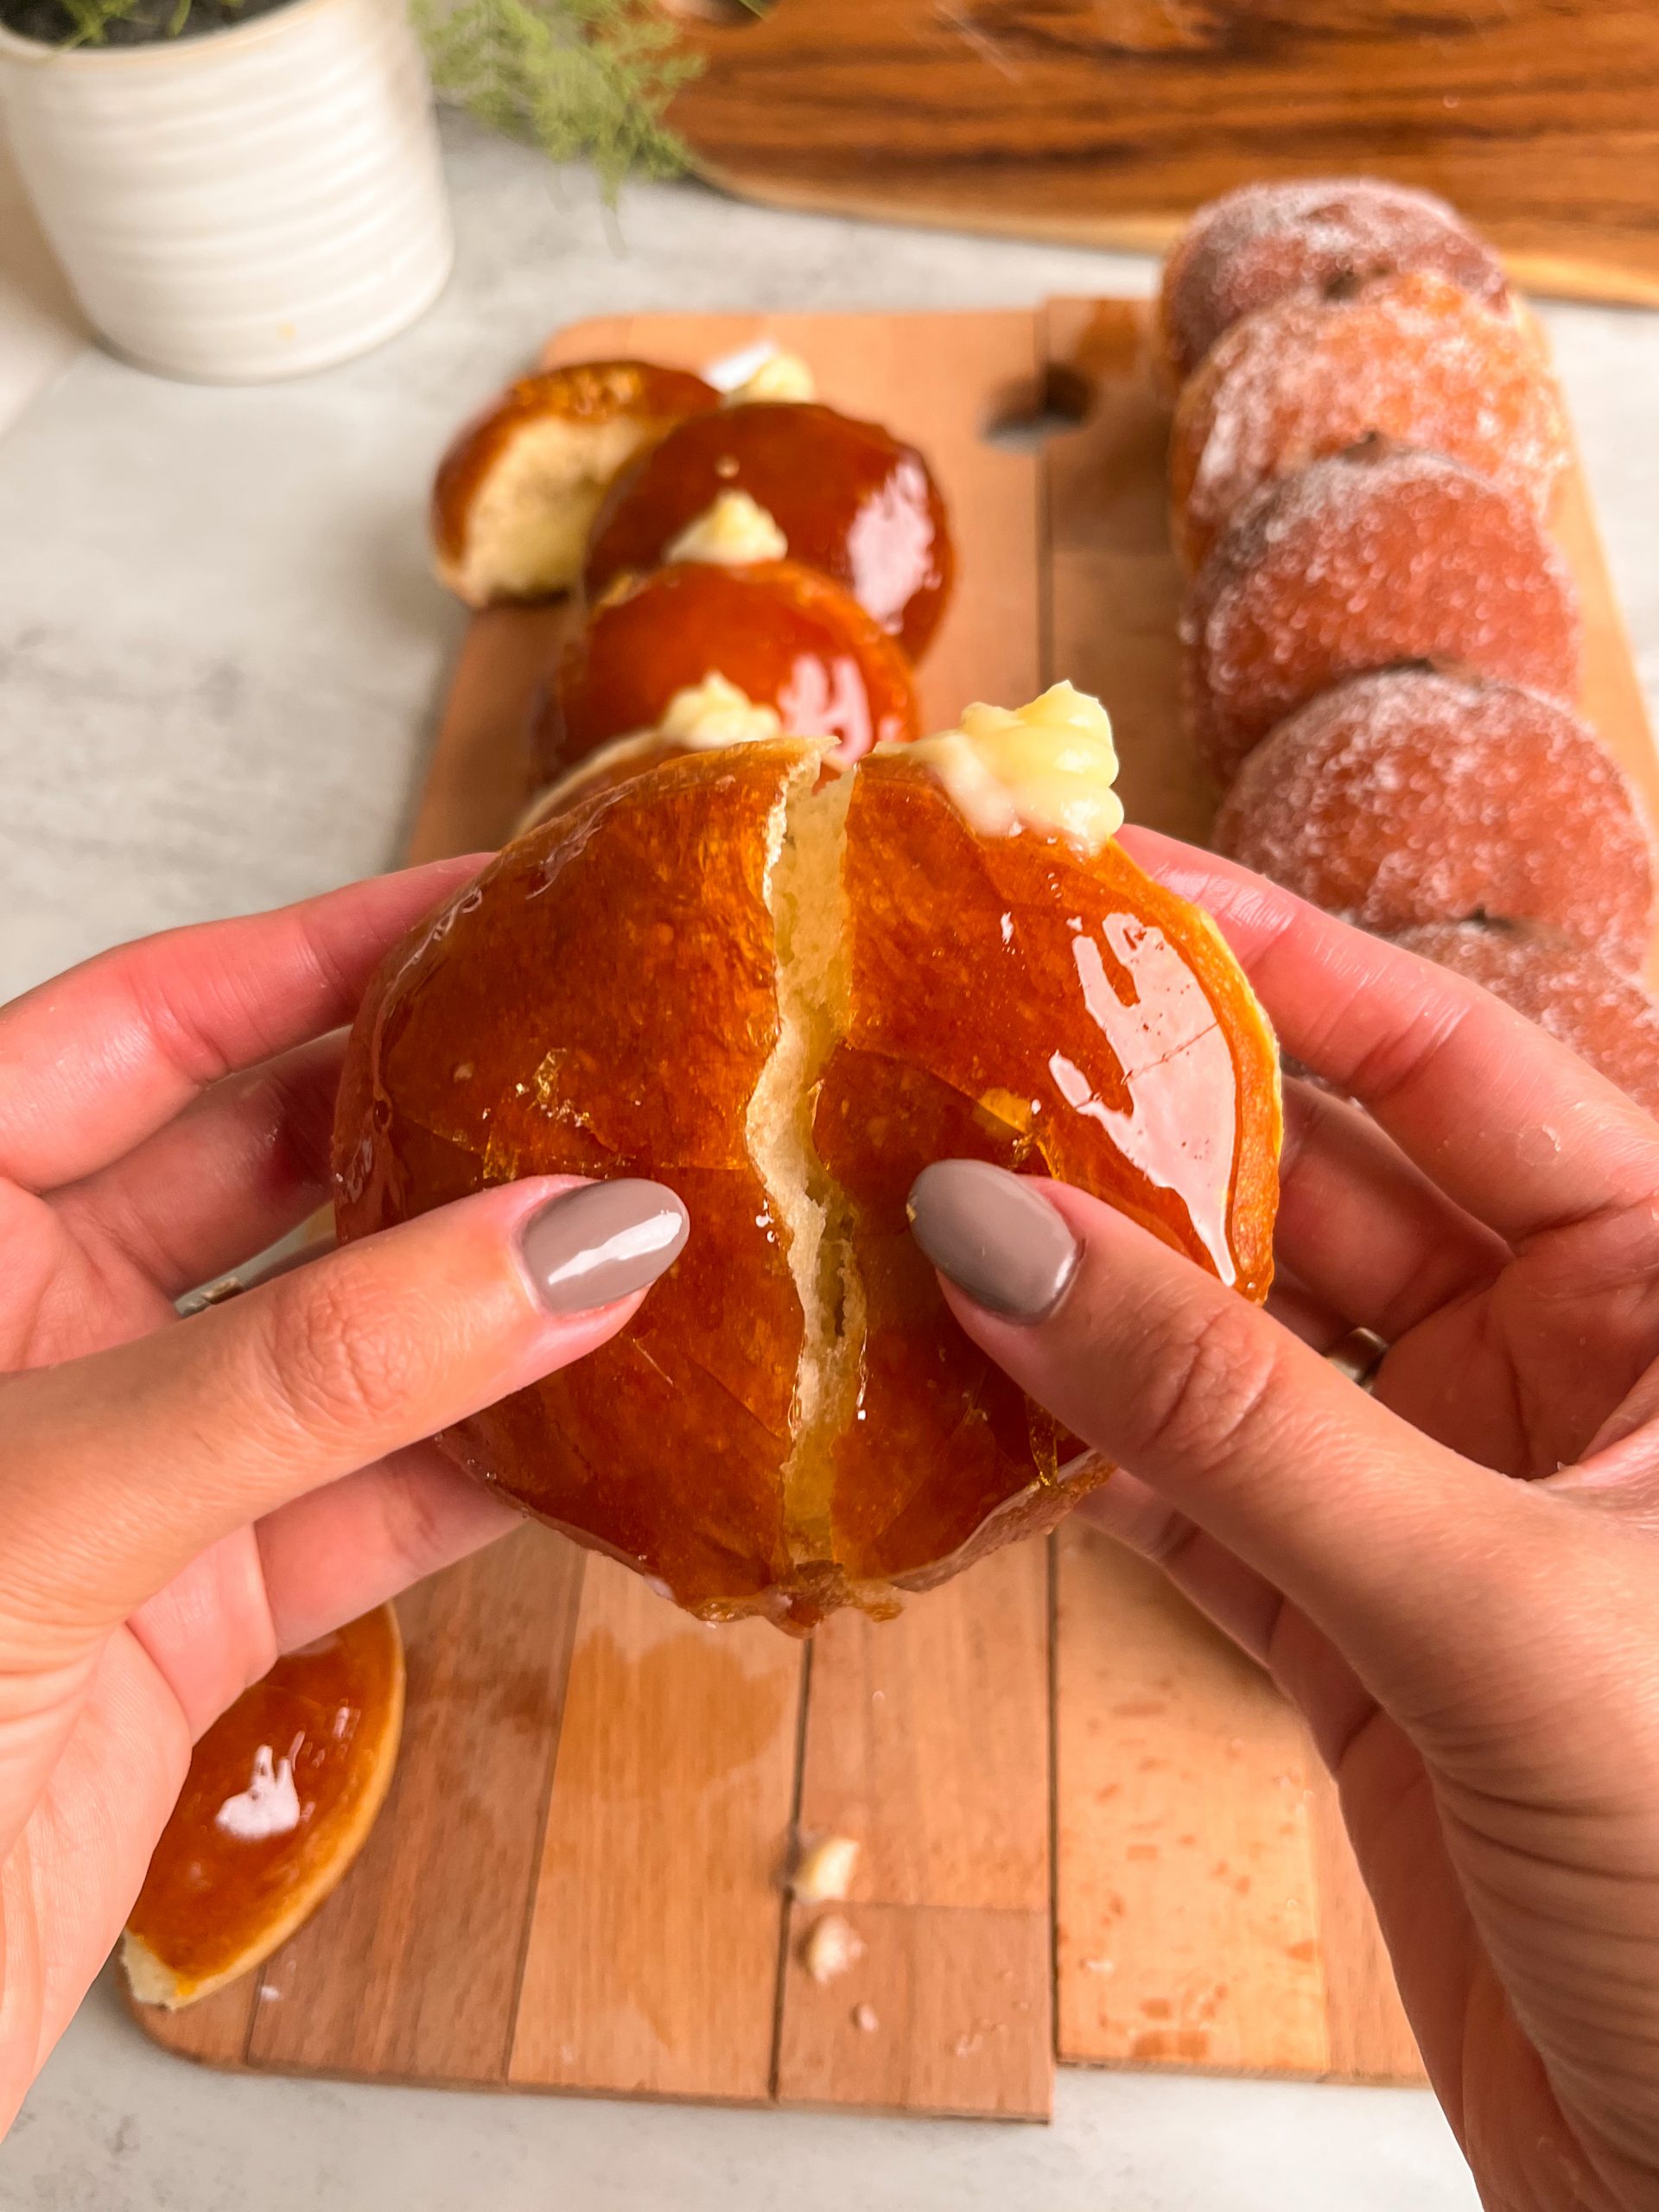 Two hands pulling apart a creme brulee donut, with the caramel coating cracked where the donut is being halved